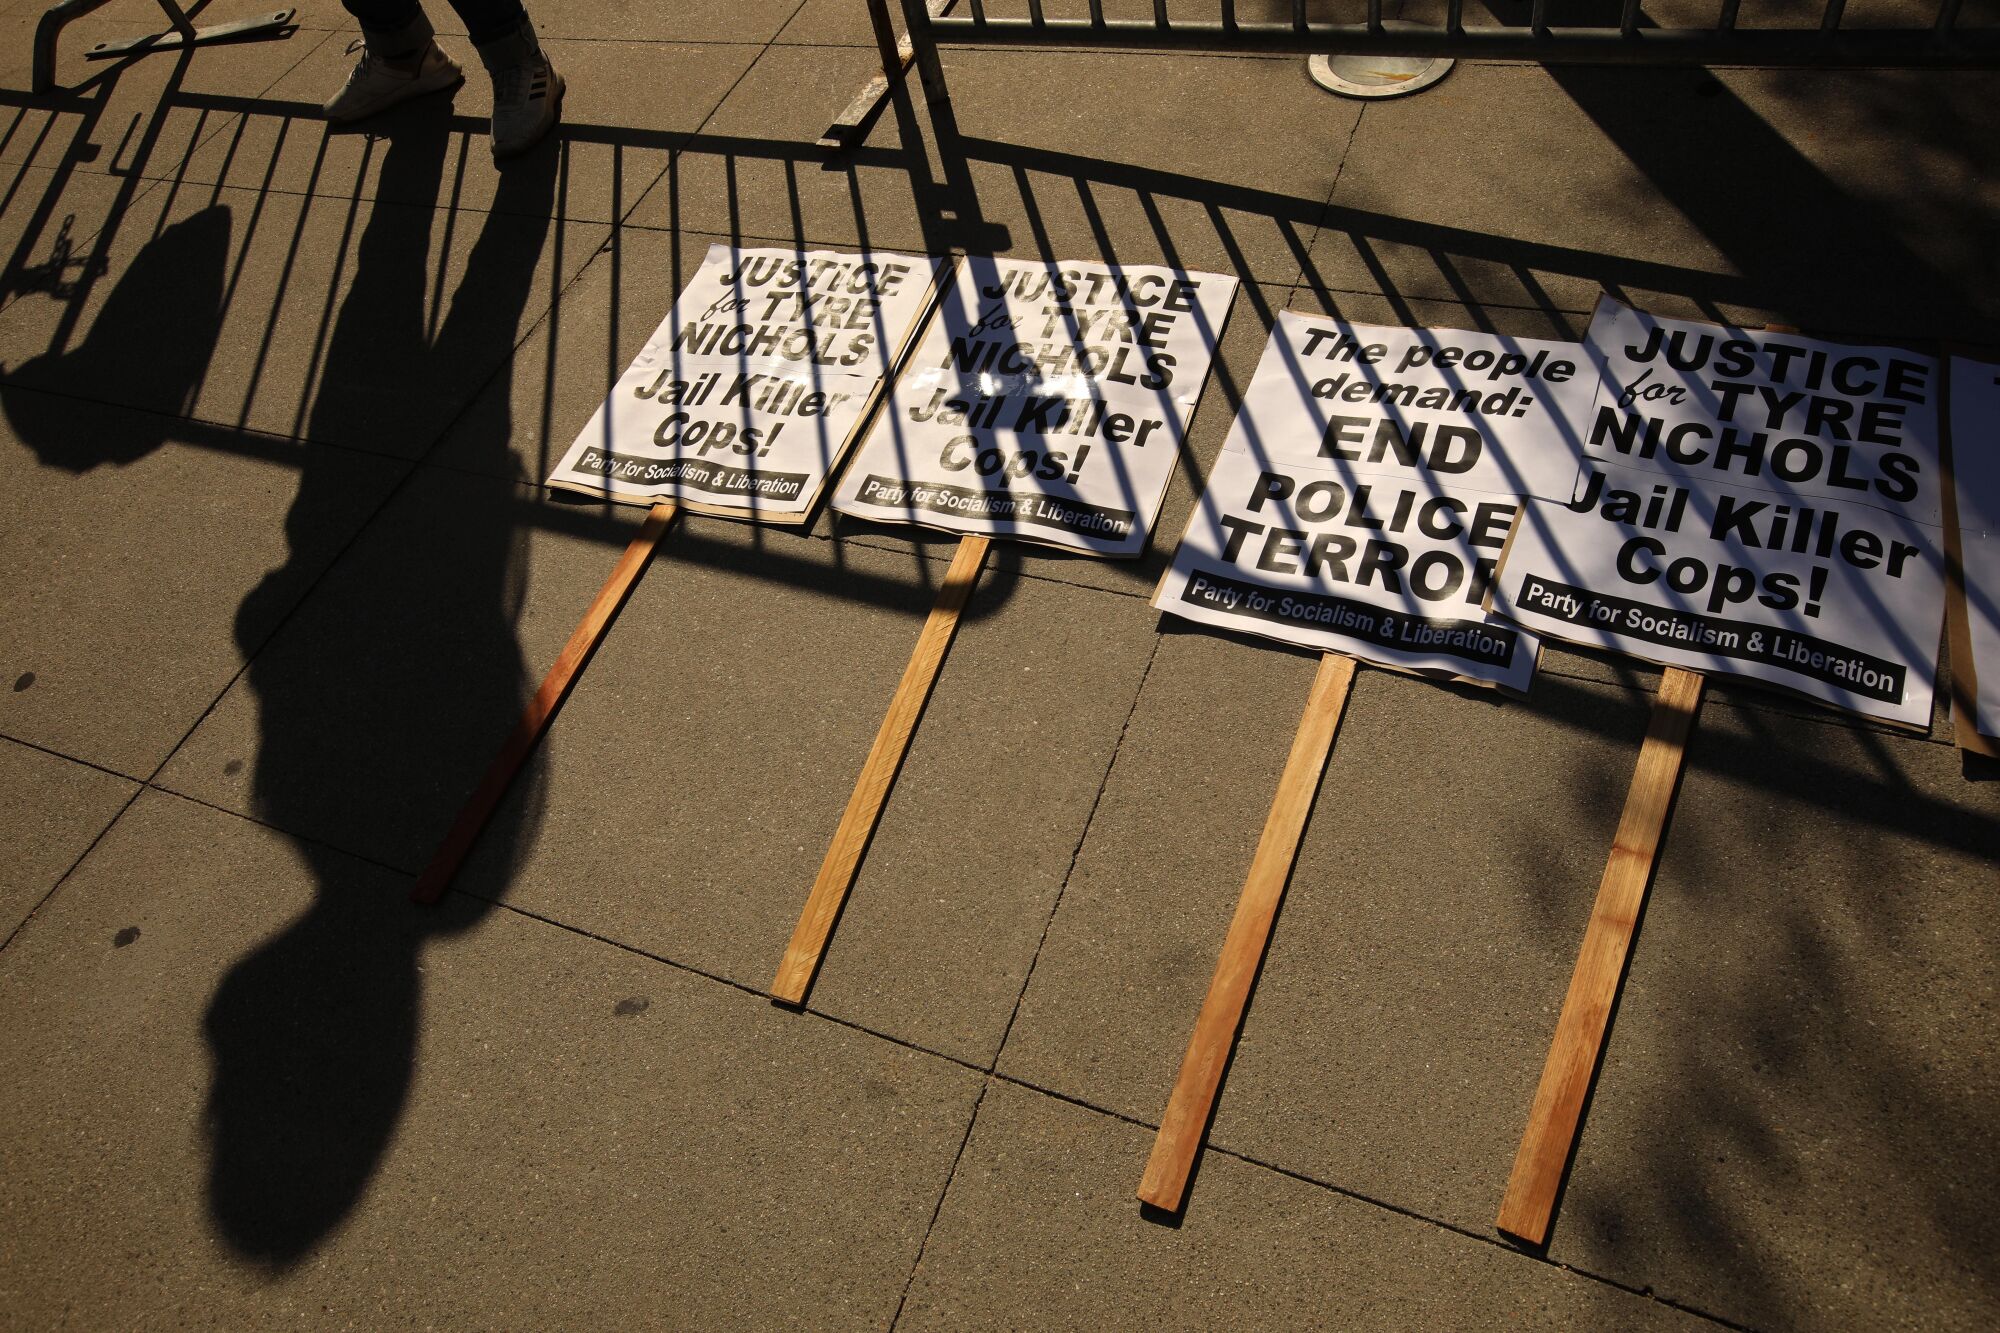 A shadow is cast over picket signs, some with writing "end police terror. jail killer cops."